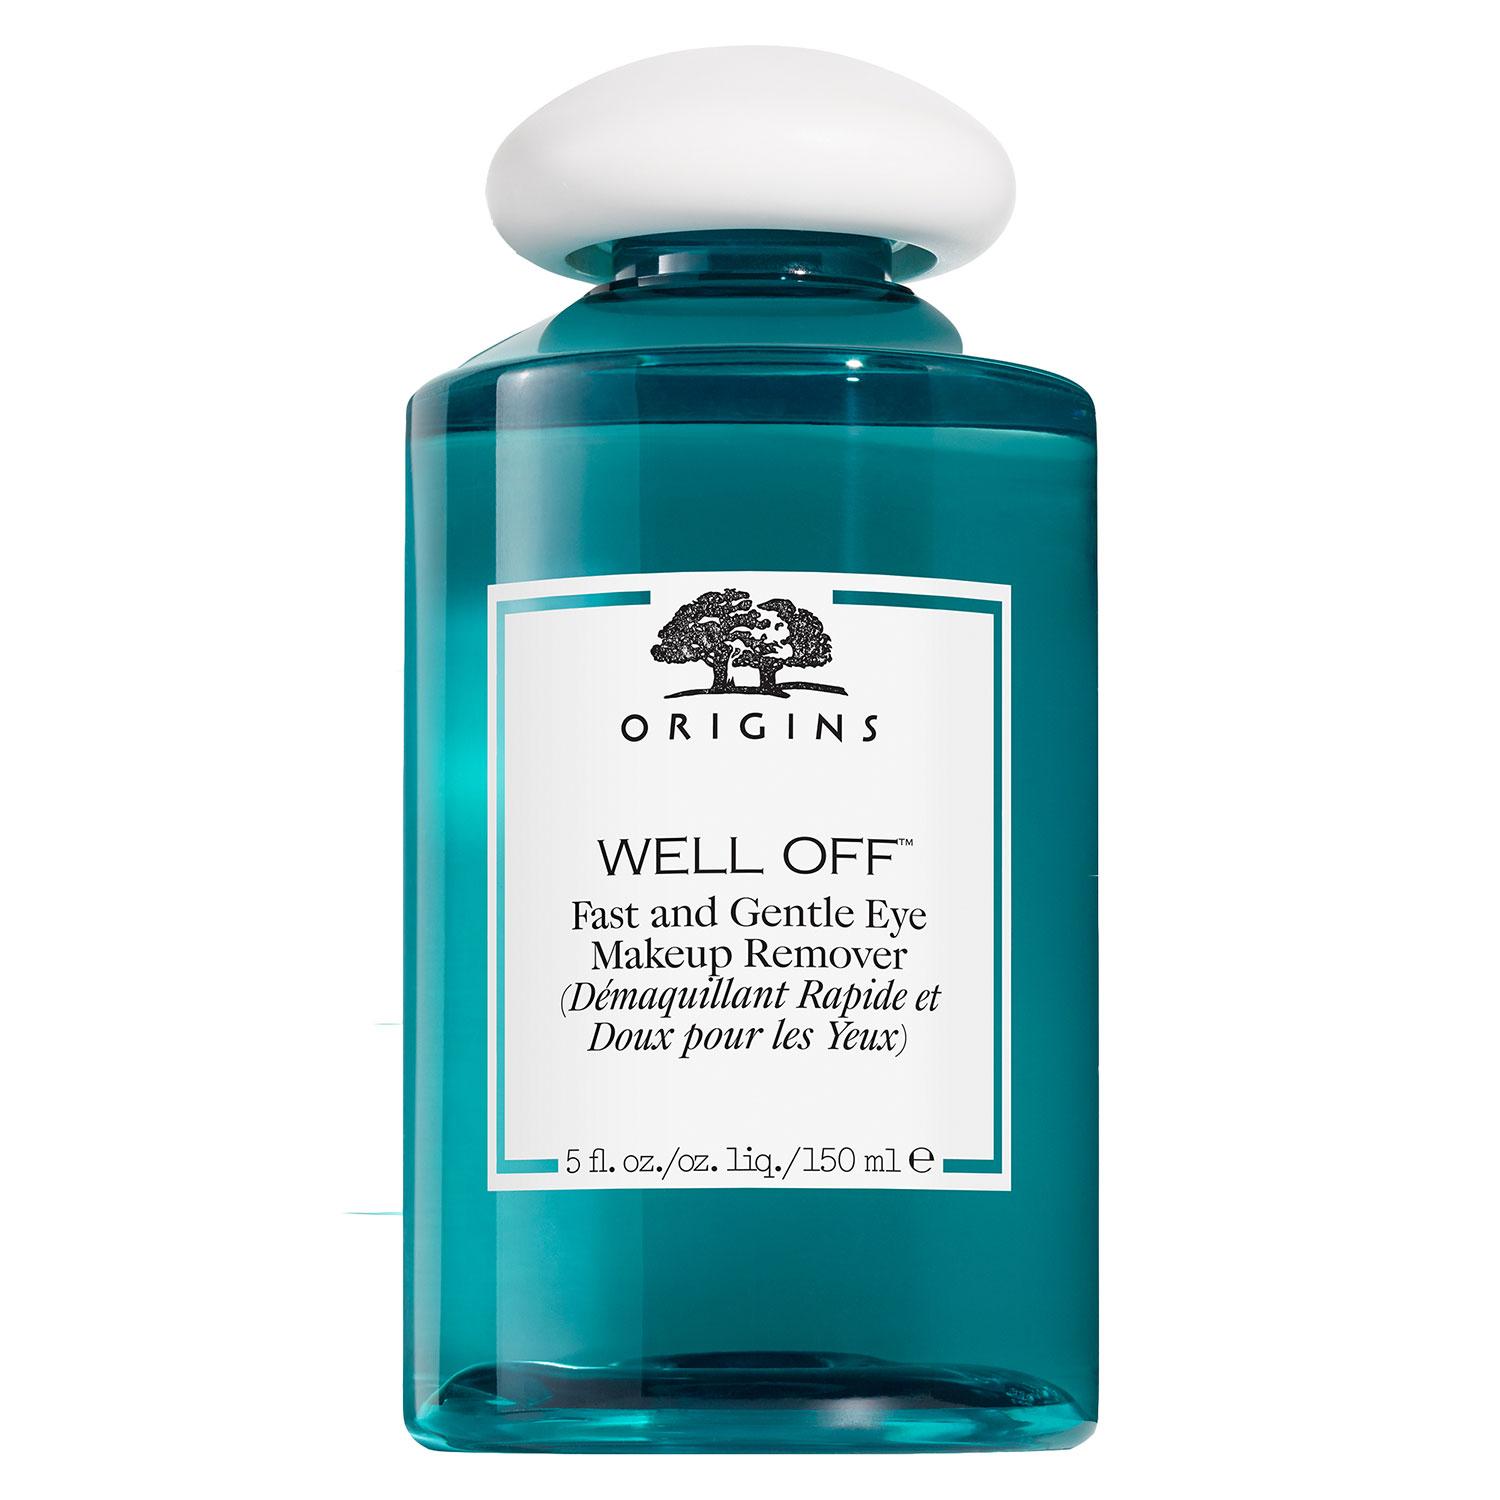 Origins Well Off - Fast And Gentle Eye Makeup Remover